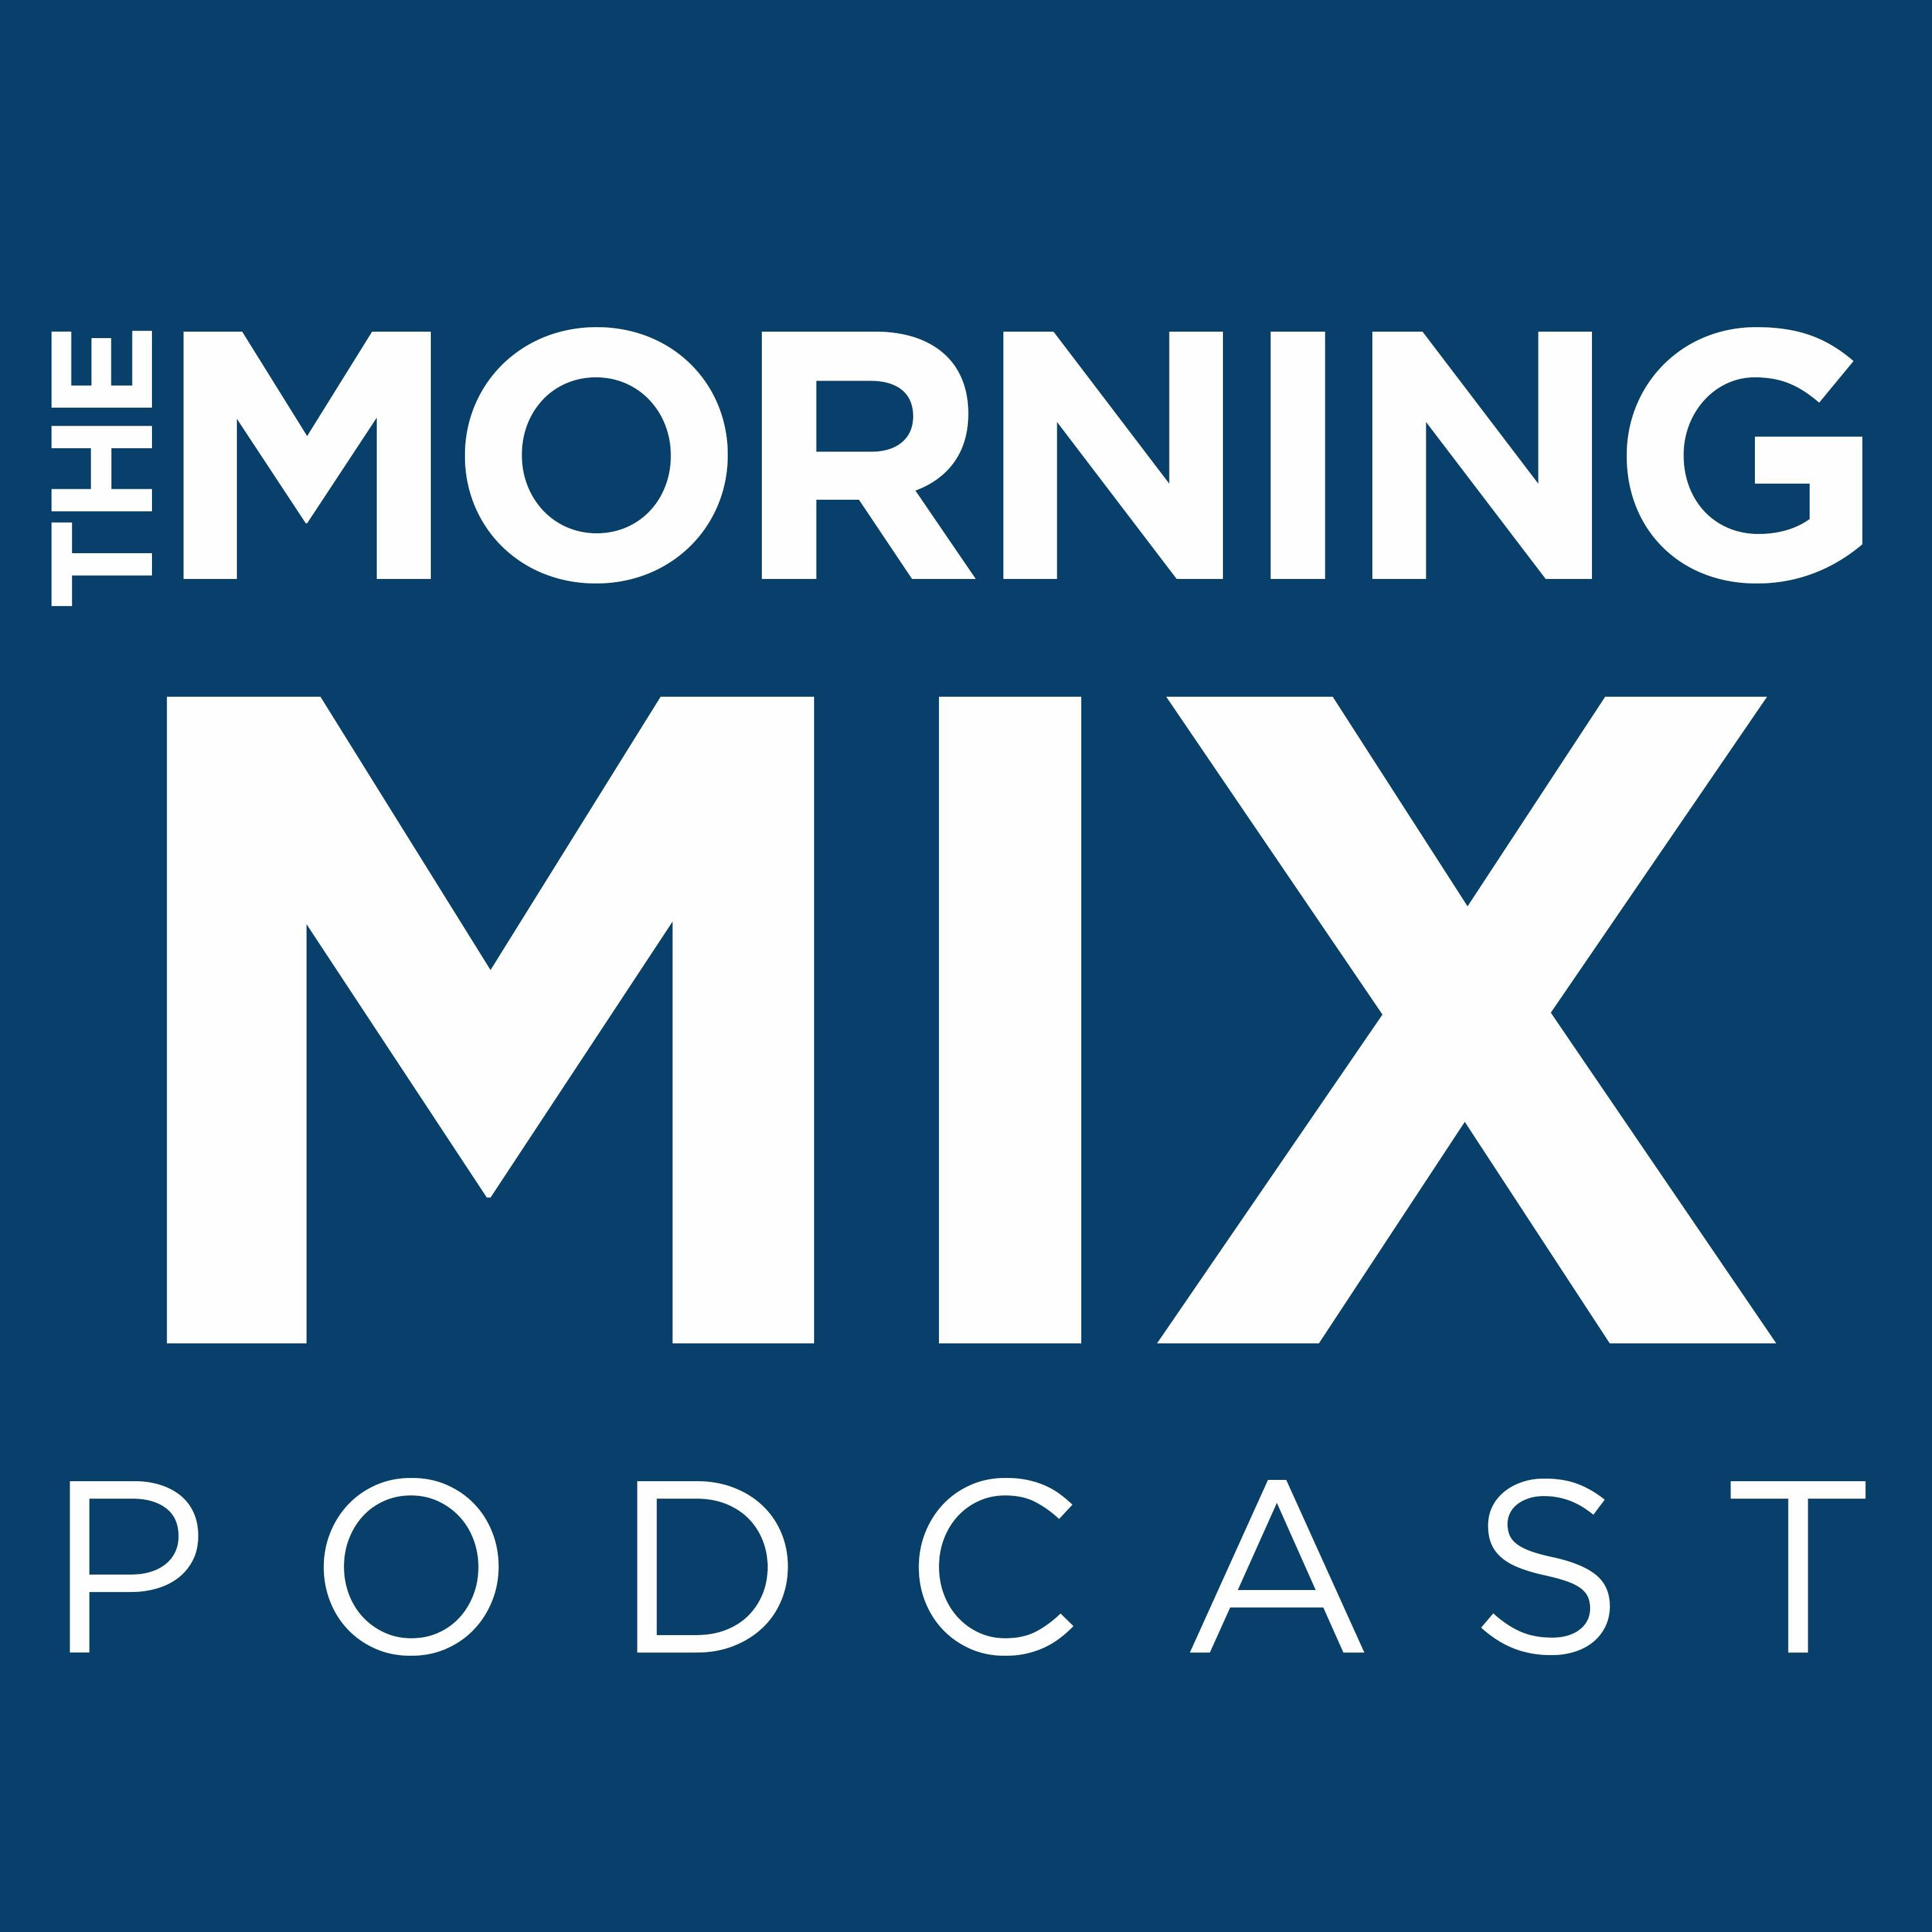 The Morning Mix podcast